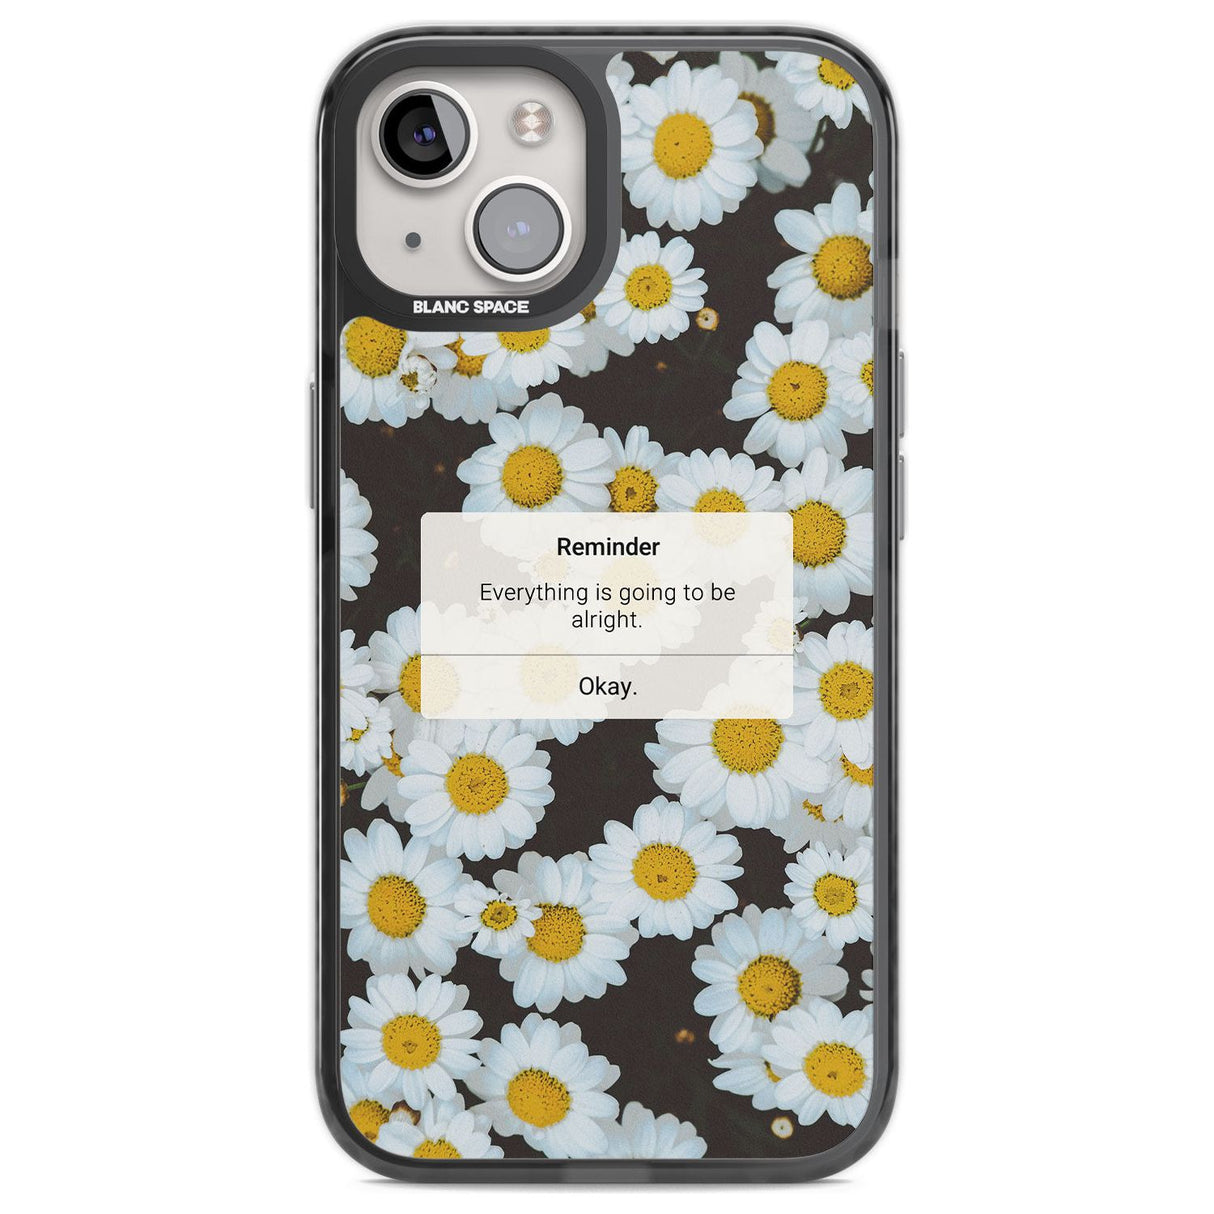 "Everything will be alright" iPhone Reminder Phone Case iPhone 12 / Black Impact Case,iPhone 13 / Black Impact Case,iPhone 12 Pro / Black Impact Case,iPhone 14 / Black Impact Case,iPhone 15 Plus / Black Impact Case,iPhone 15 / Black Impact Case Blanc Space